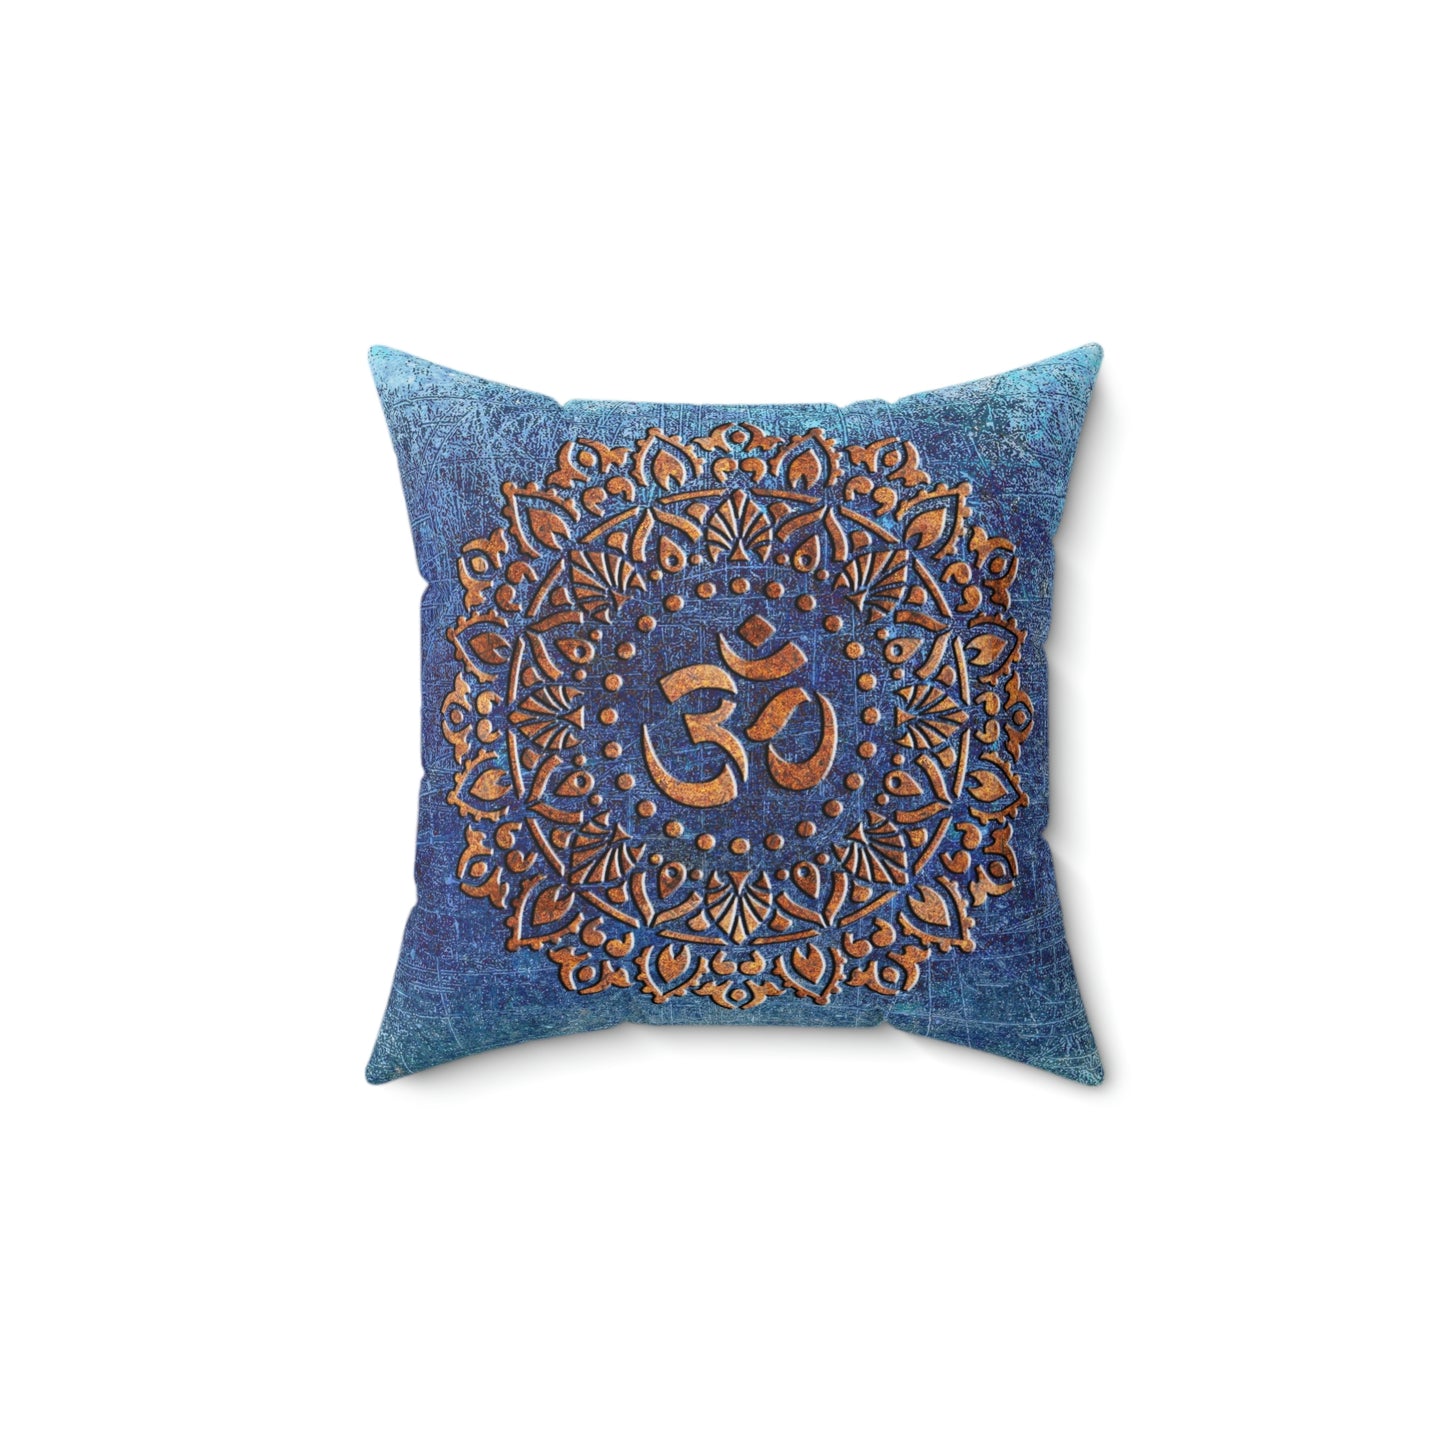 Copper Color Ohm Symbol Mandala Style Print on Distressed Blue Background Spun Polyester Square Pillow - 4 sizes available